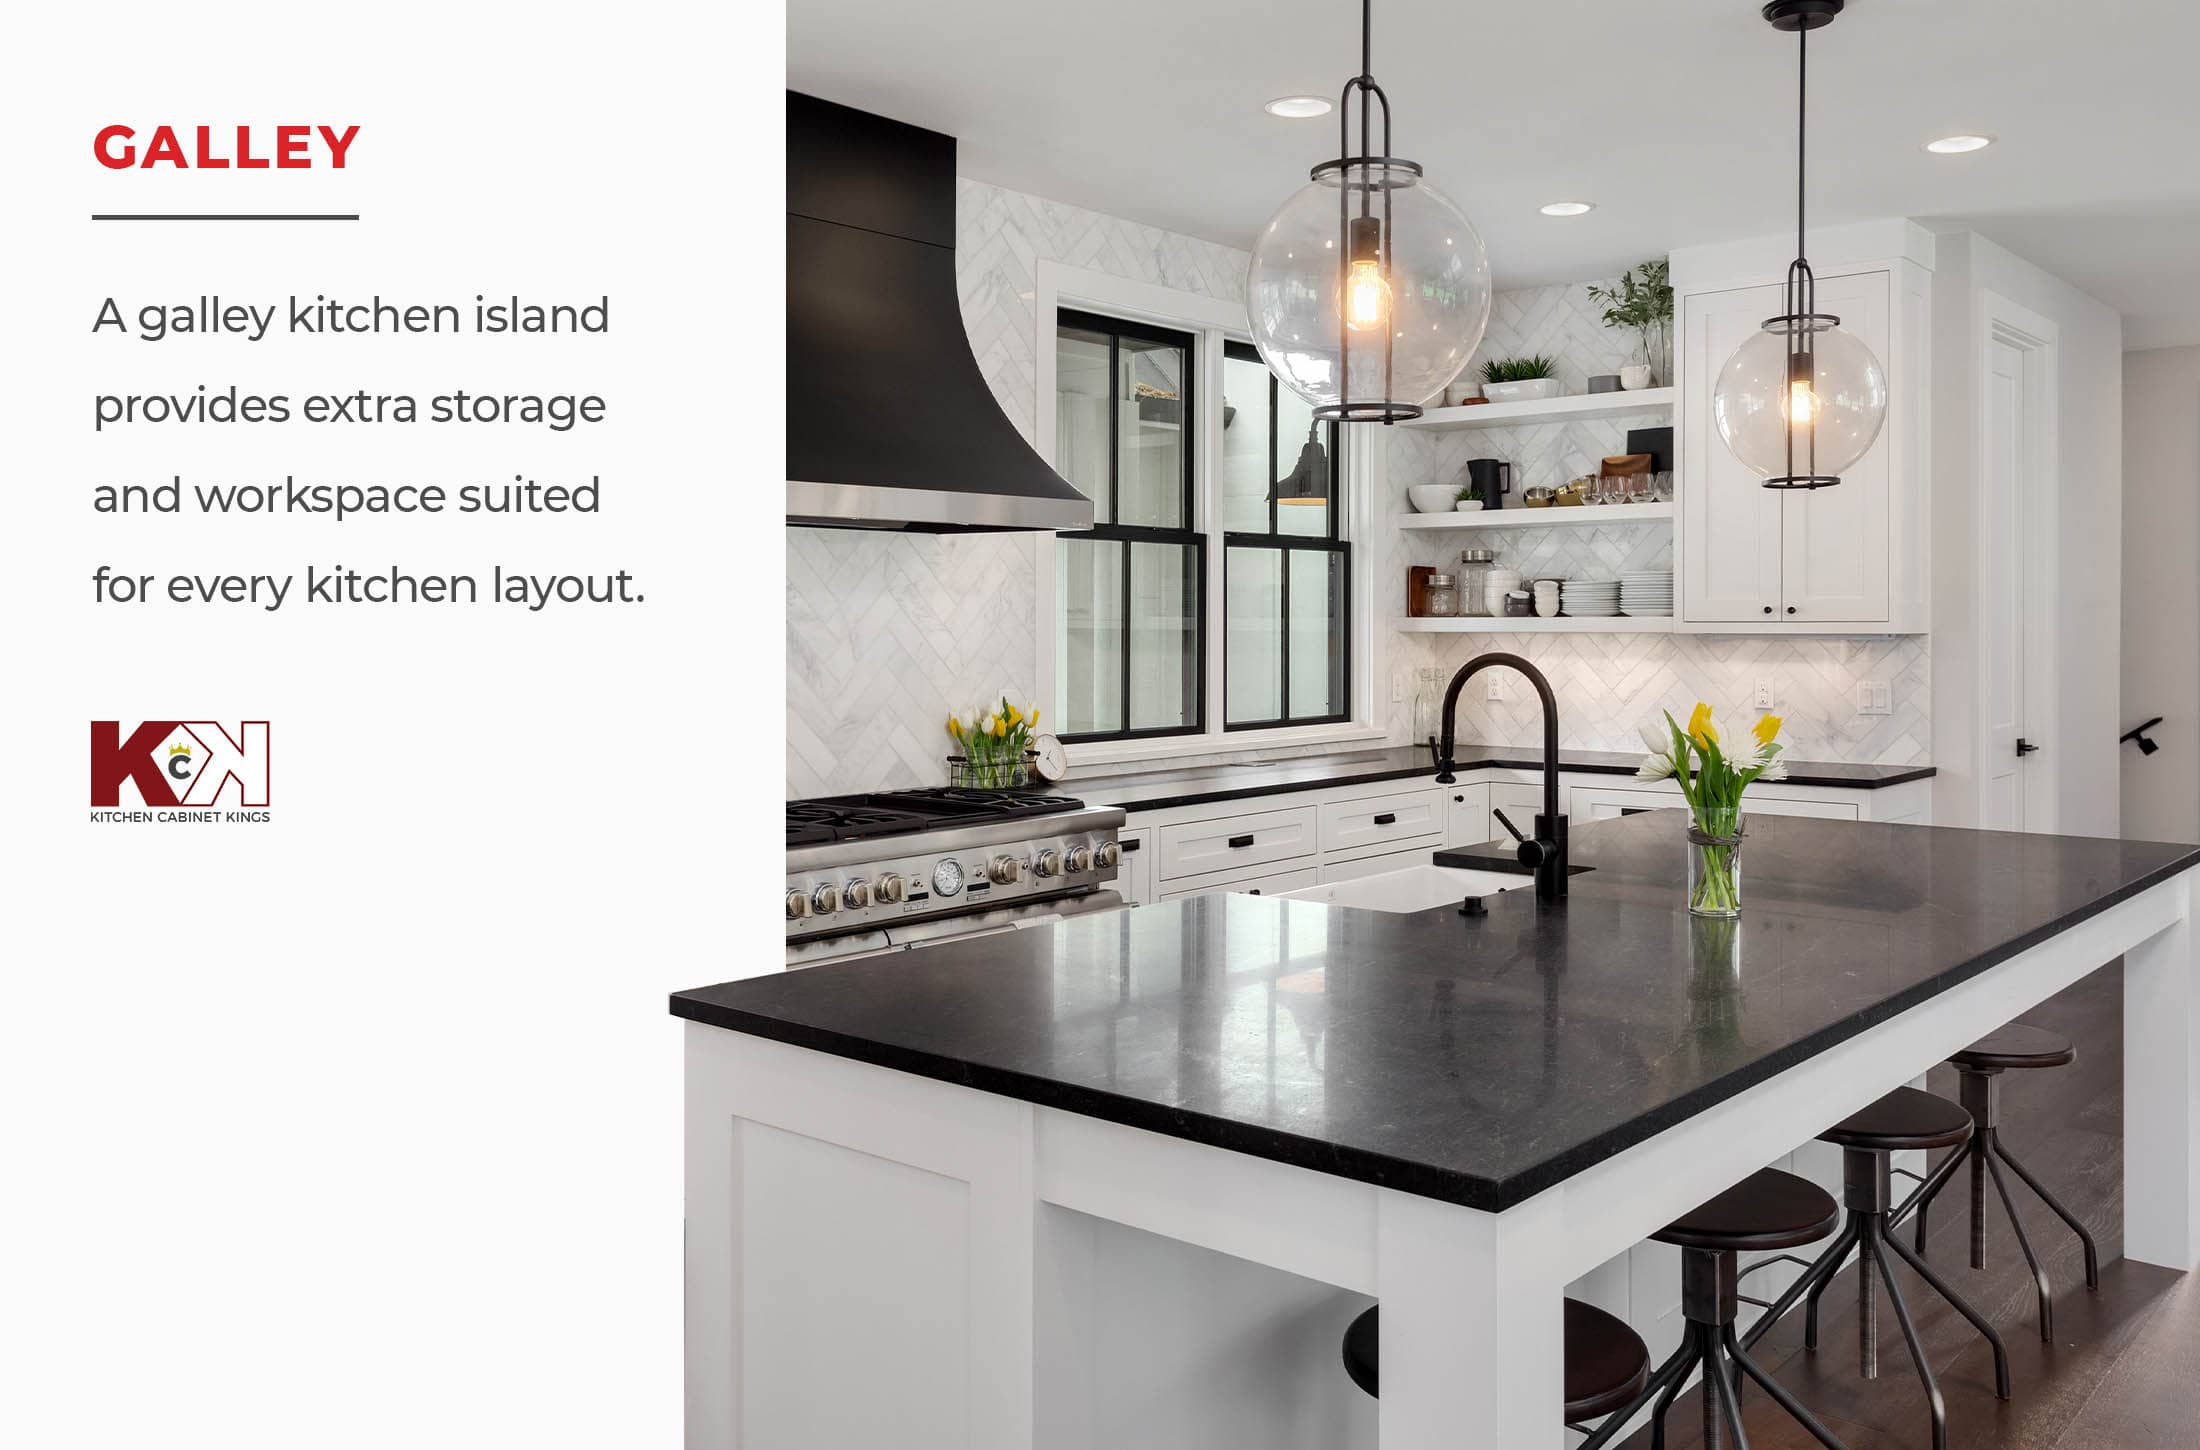 Image and definition of galley kitchen island.